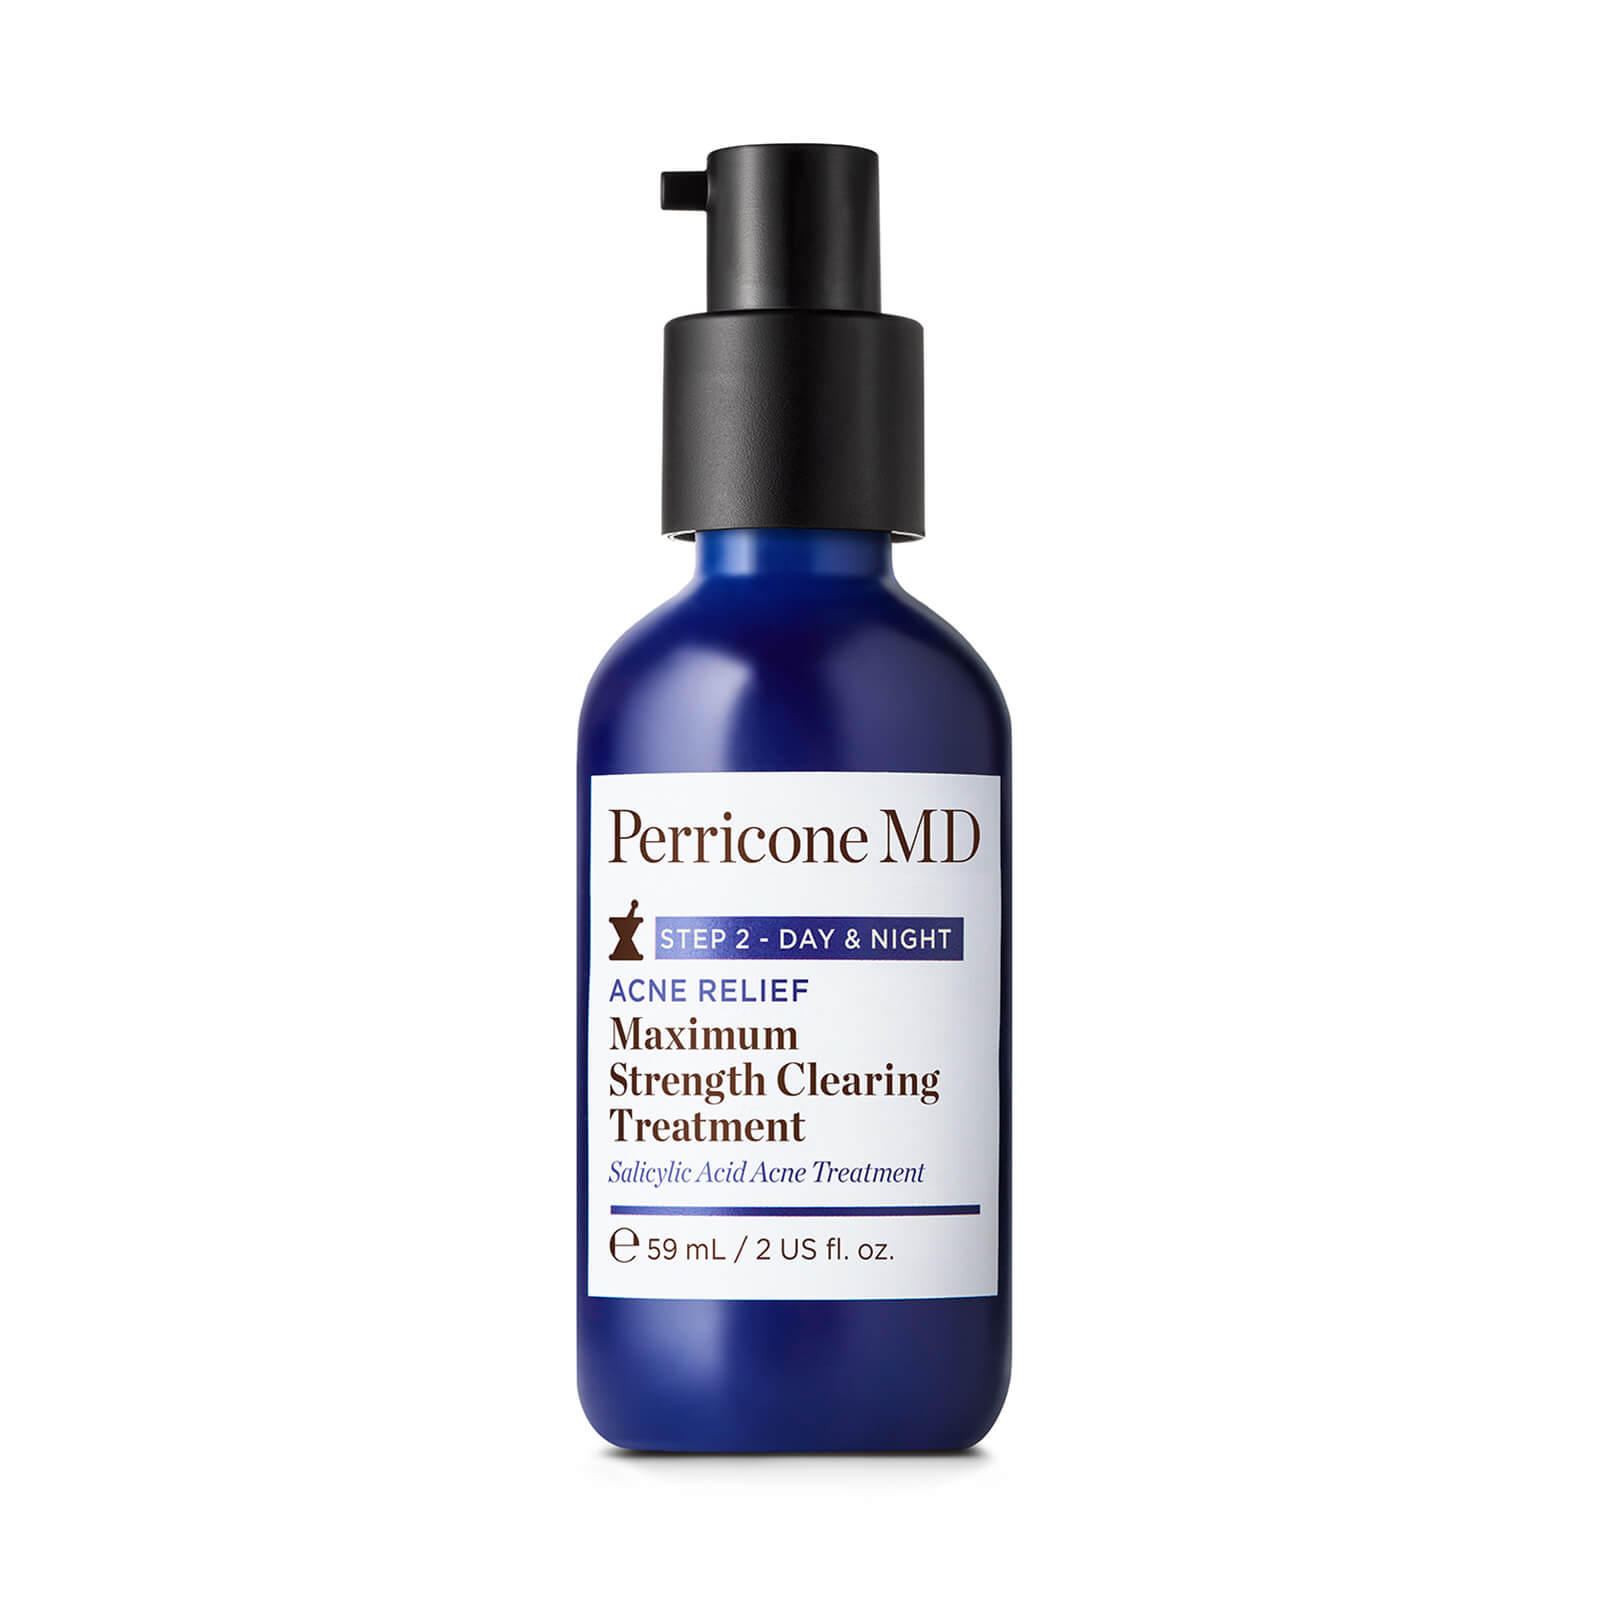 Perricone Md Acne Relief Maximum Strength Clearing Treatment